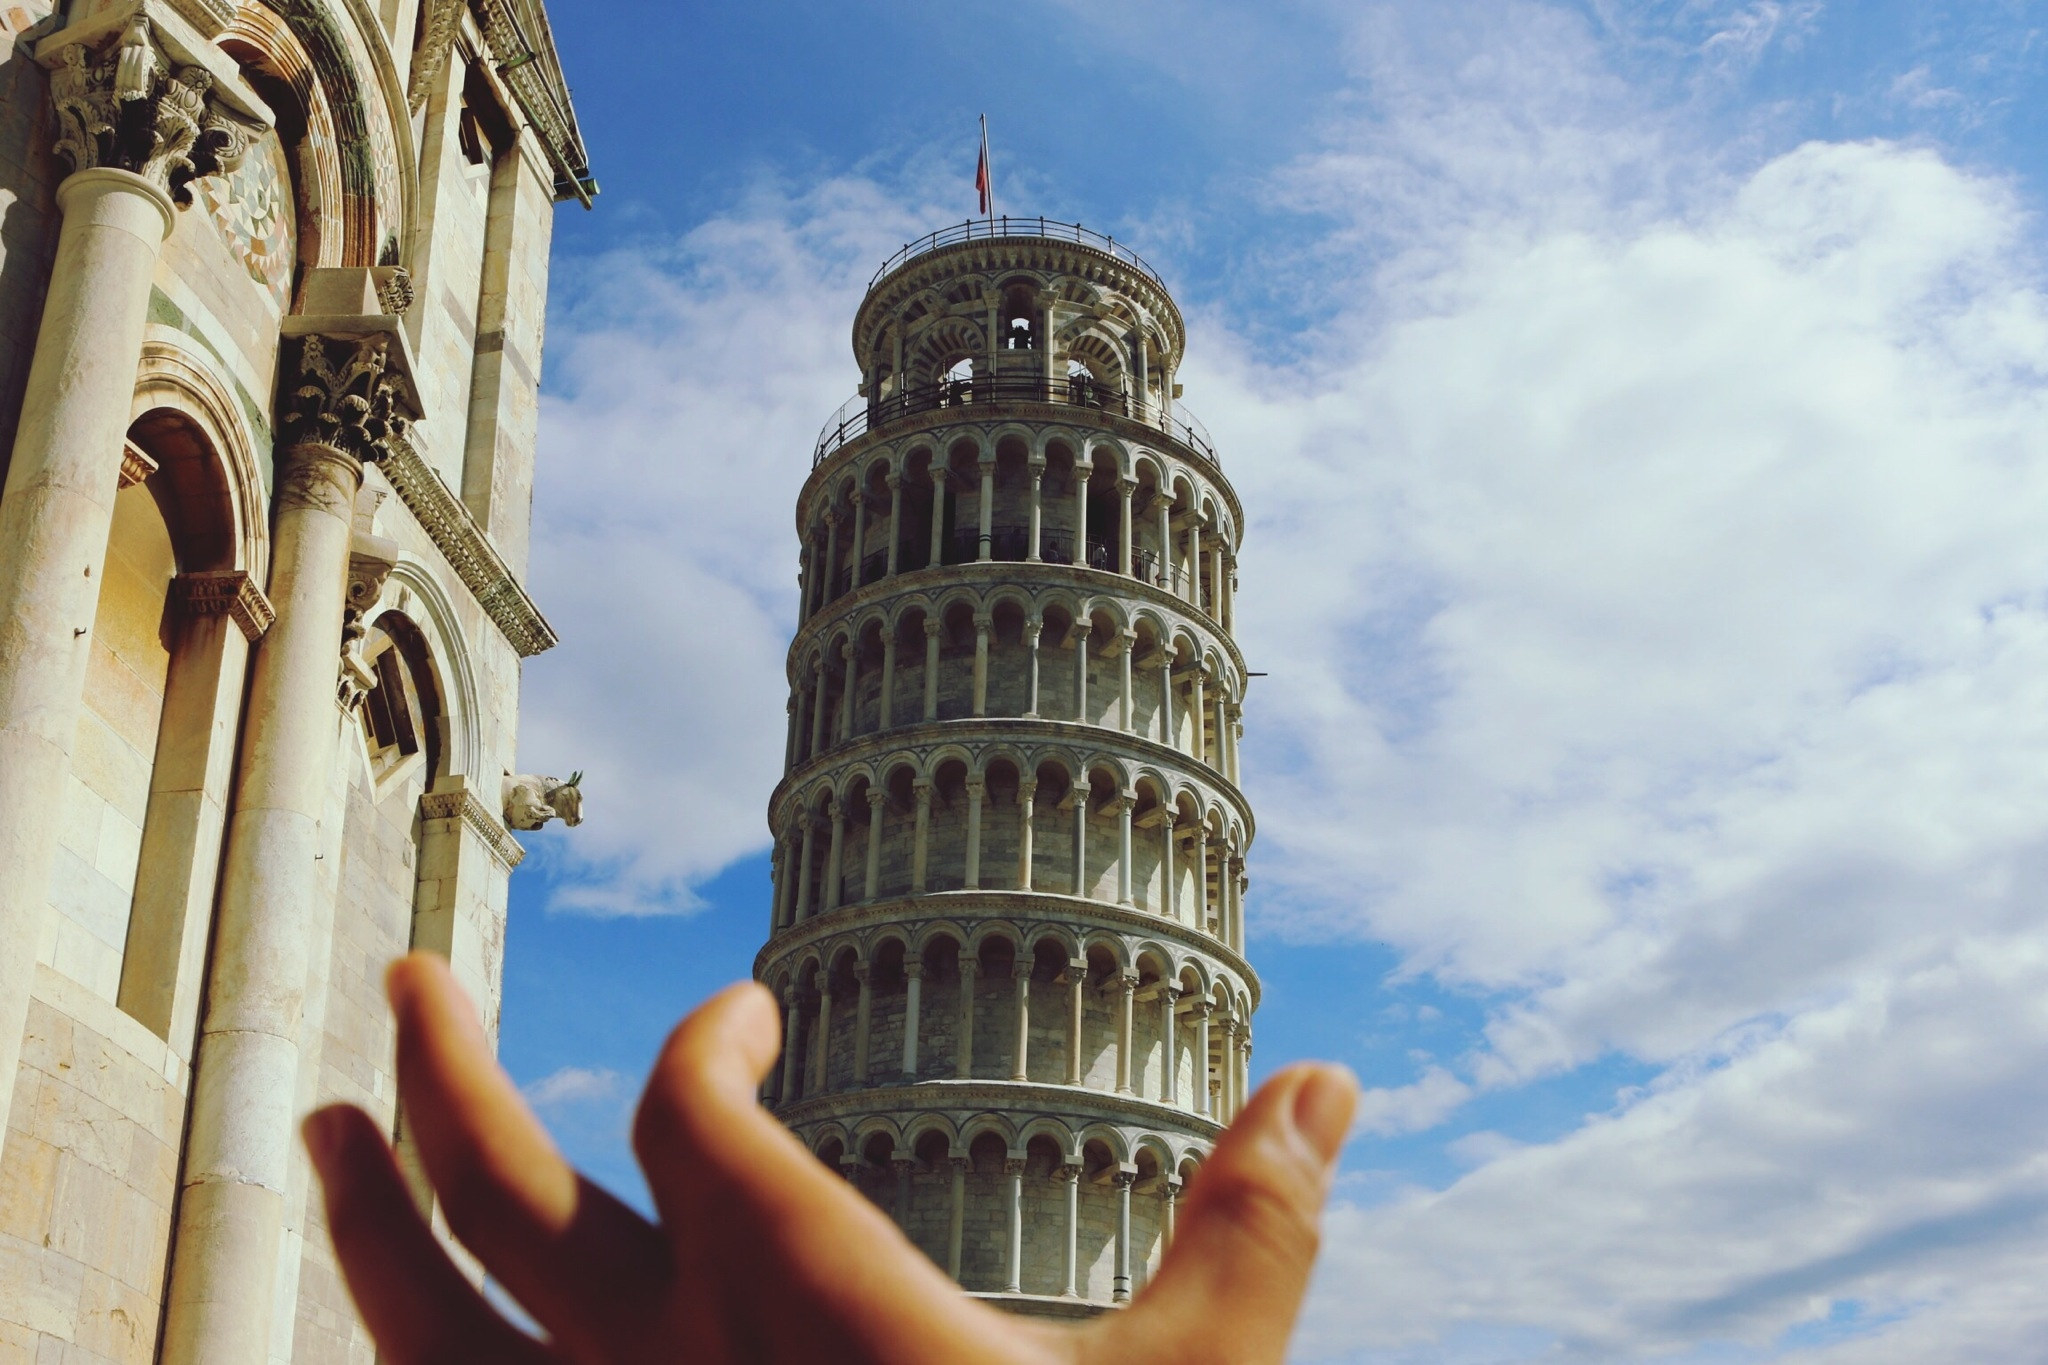 A hand &quot;holding&quot; the Leaning Tower of Pisa.